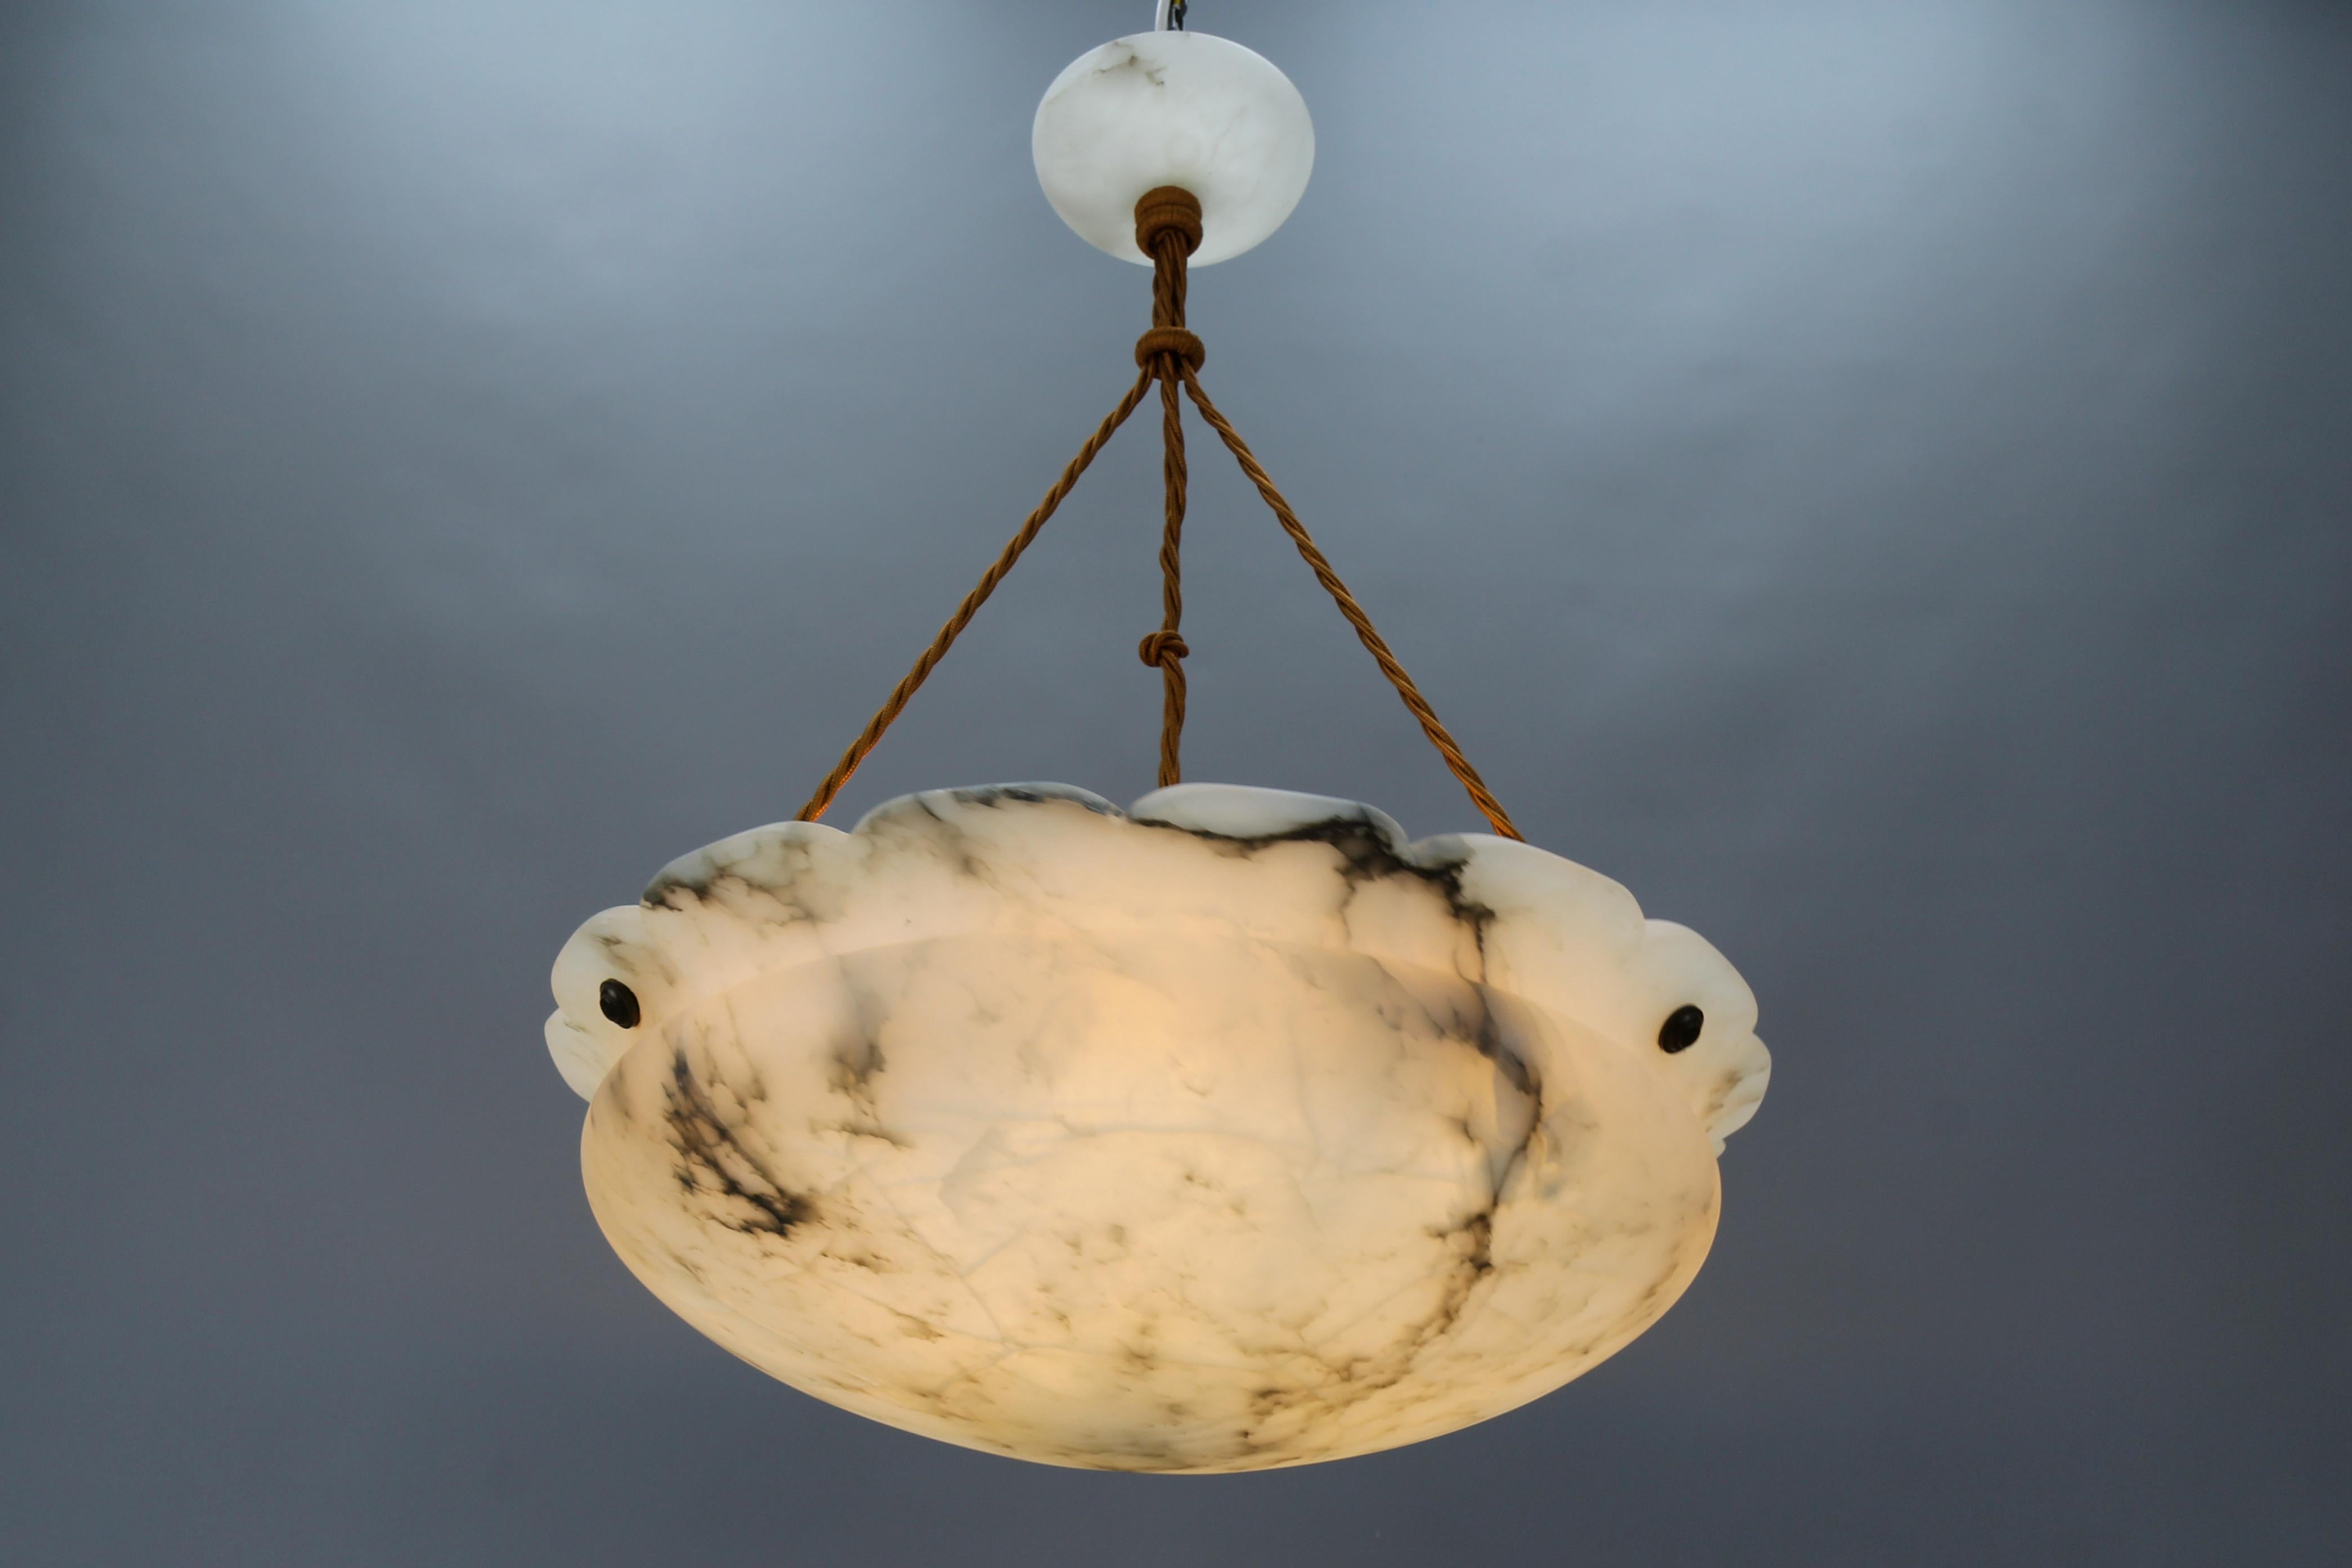 Gorgeous French Art Deco white alabaster pendant ceiling light fixture with dark brown and black veins. This beautifully veined, masterfully, in an elegant shape carved one-piece alabaster bowl is suspended by three wires and an alabaster ceiling